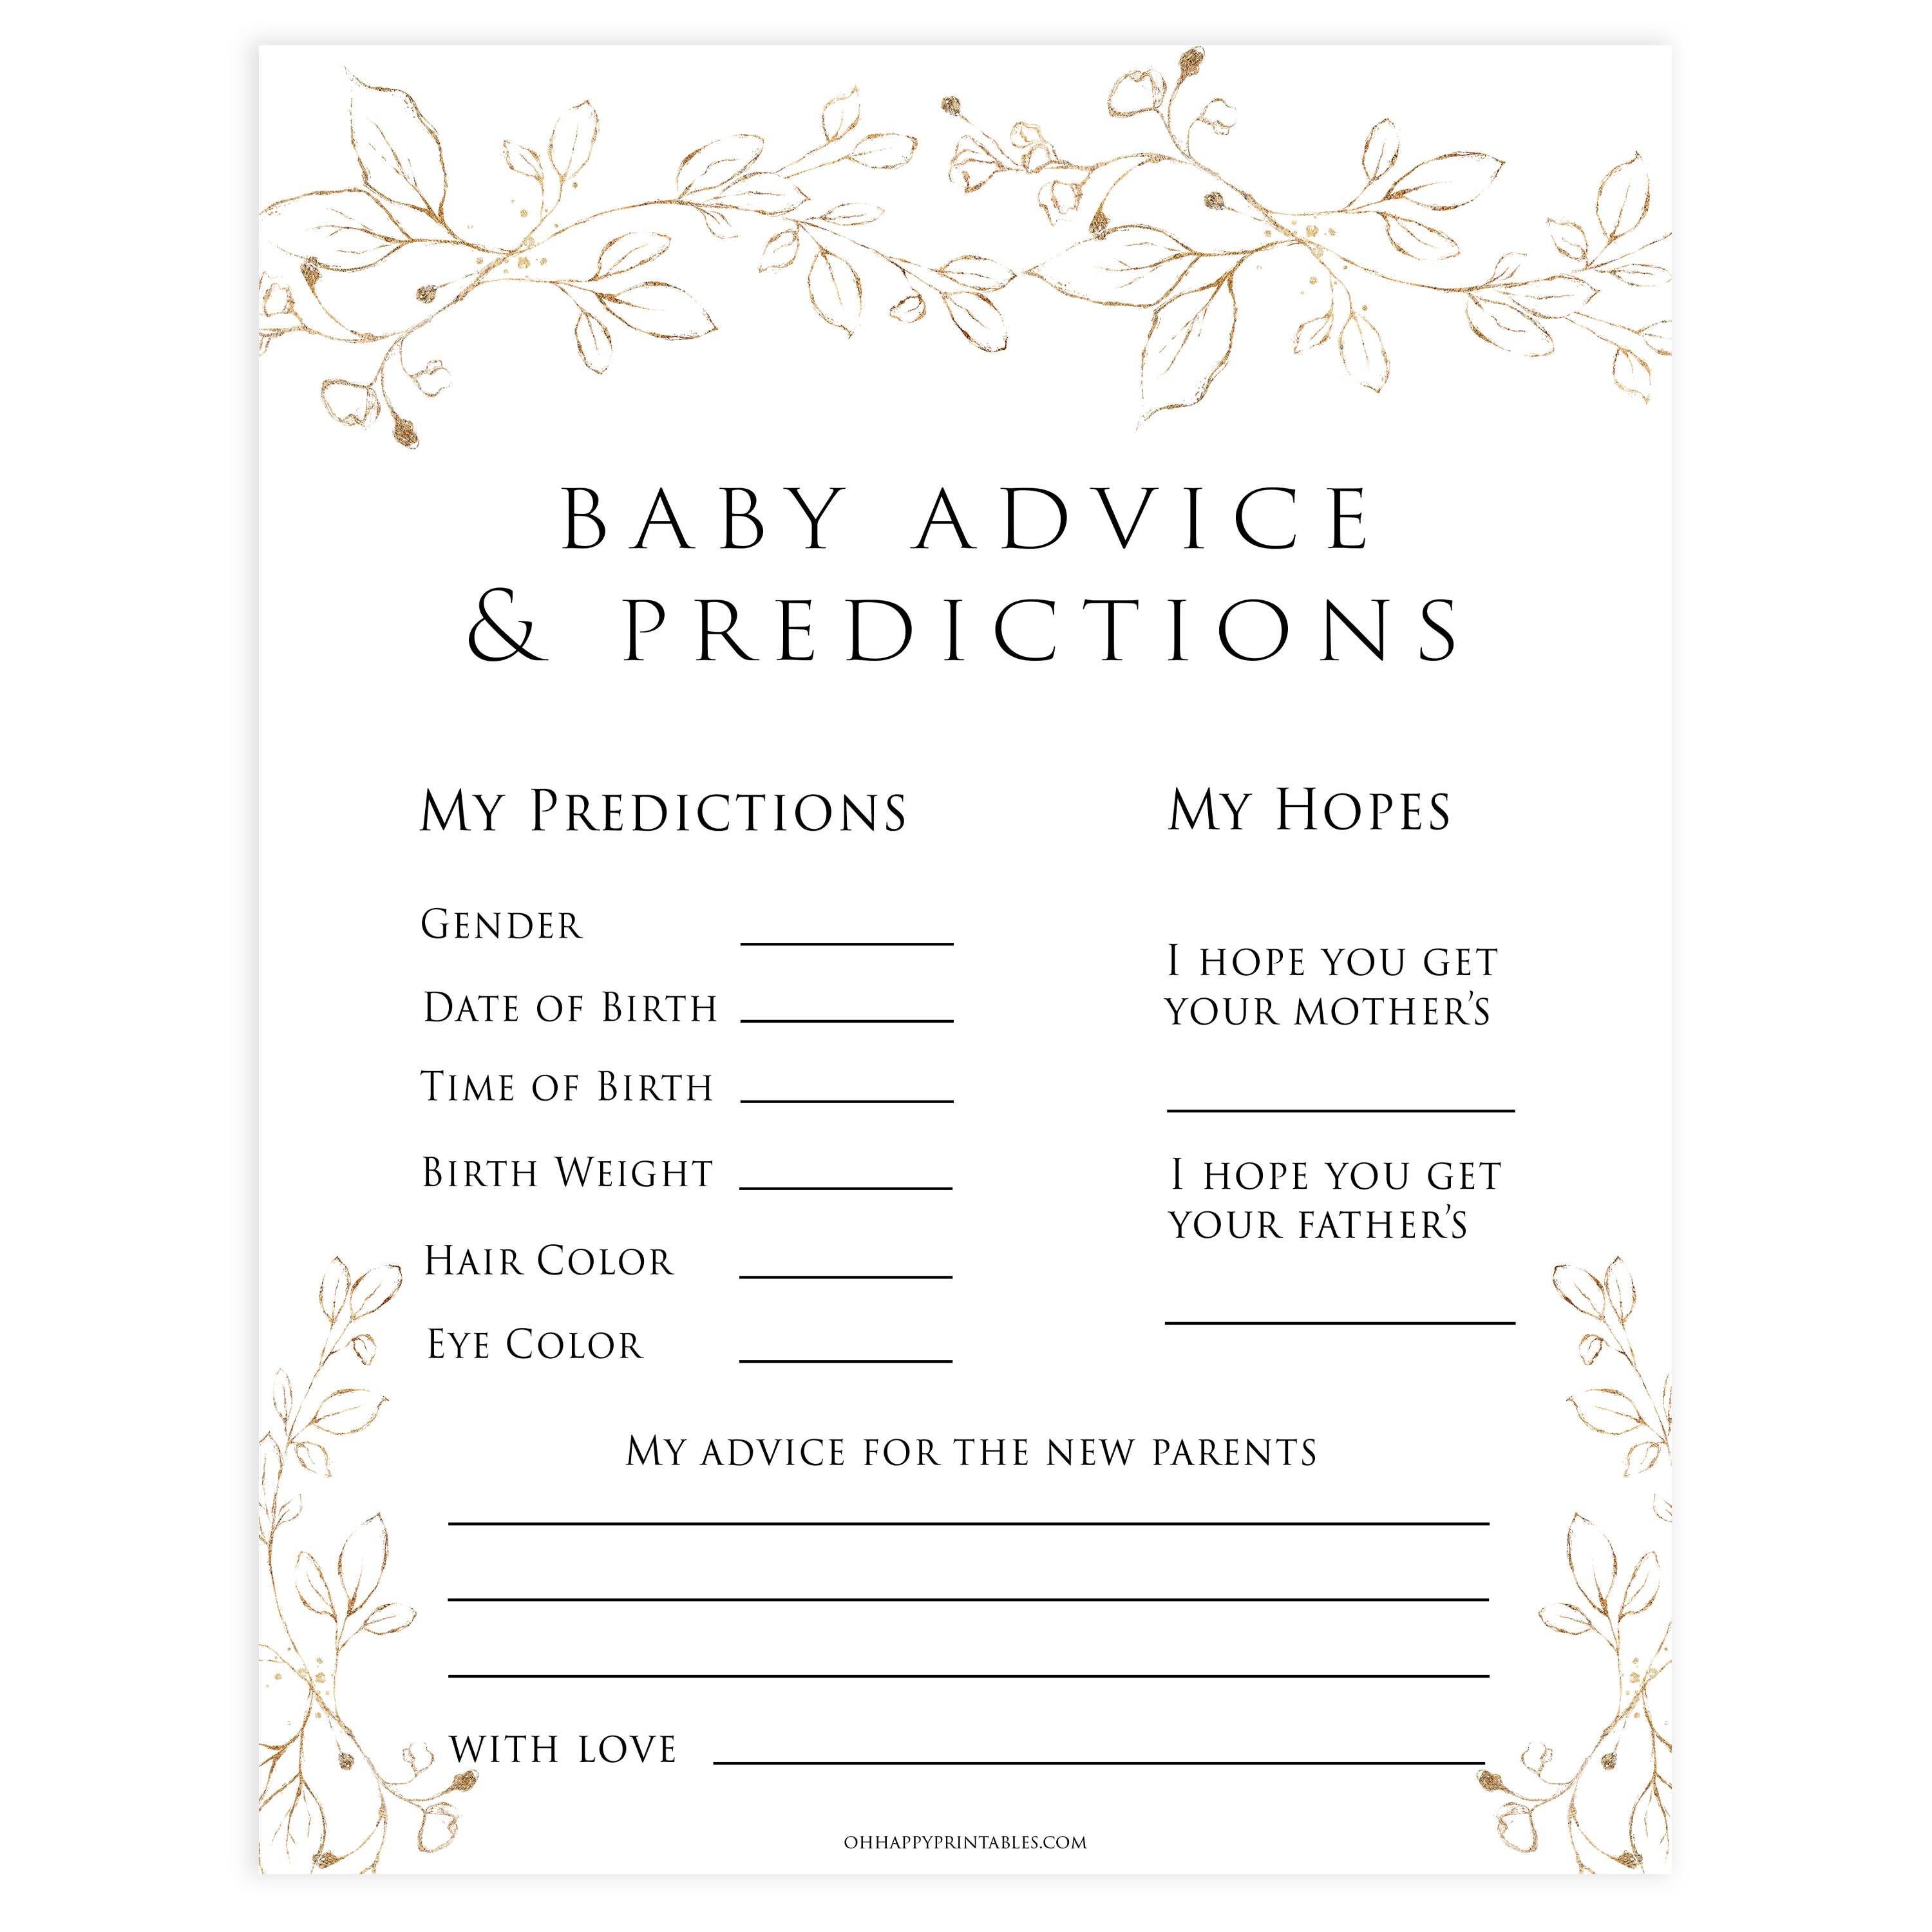 baby advice and predictions, Printable baby shower games, gold leaf baby games, baby shower games, fun baby shower ideas, top baby shower ideas, gold leaf baby shower, baby shower games, fun gold leaf baby shower ideas